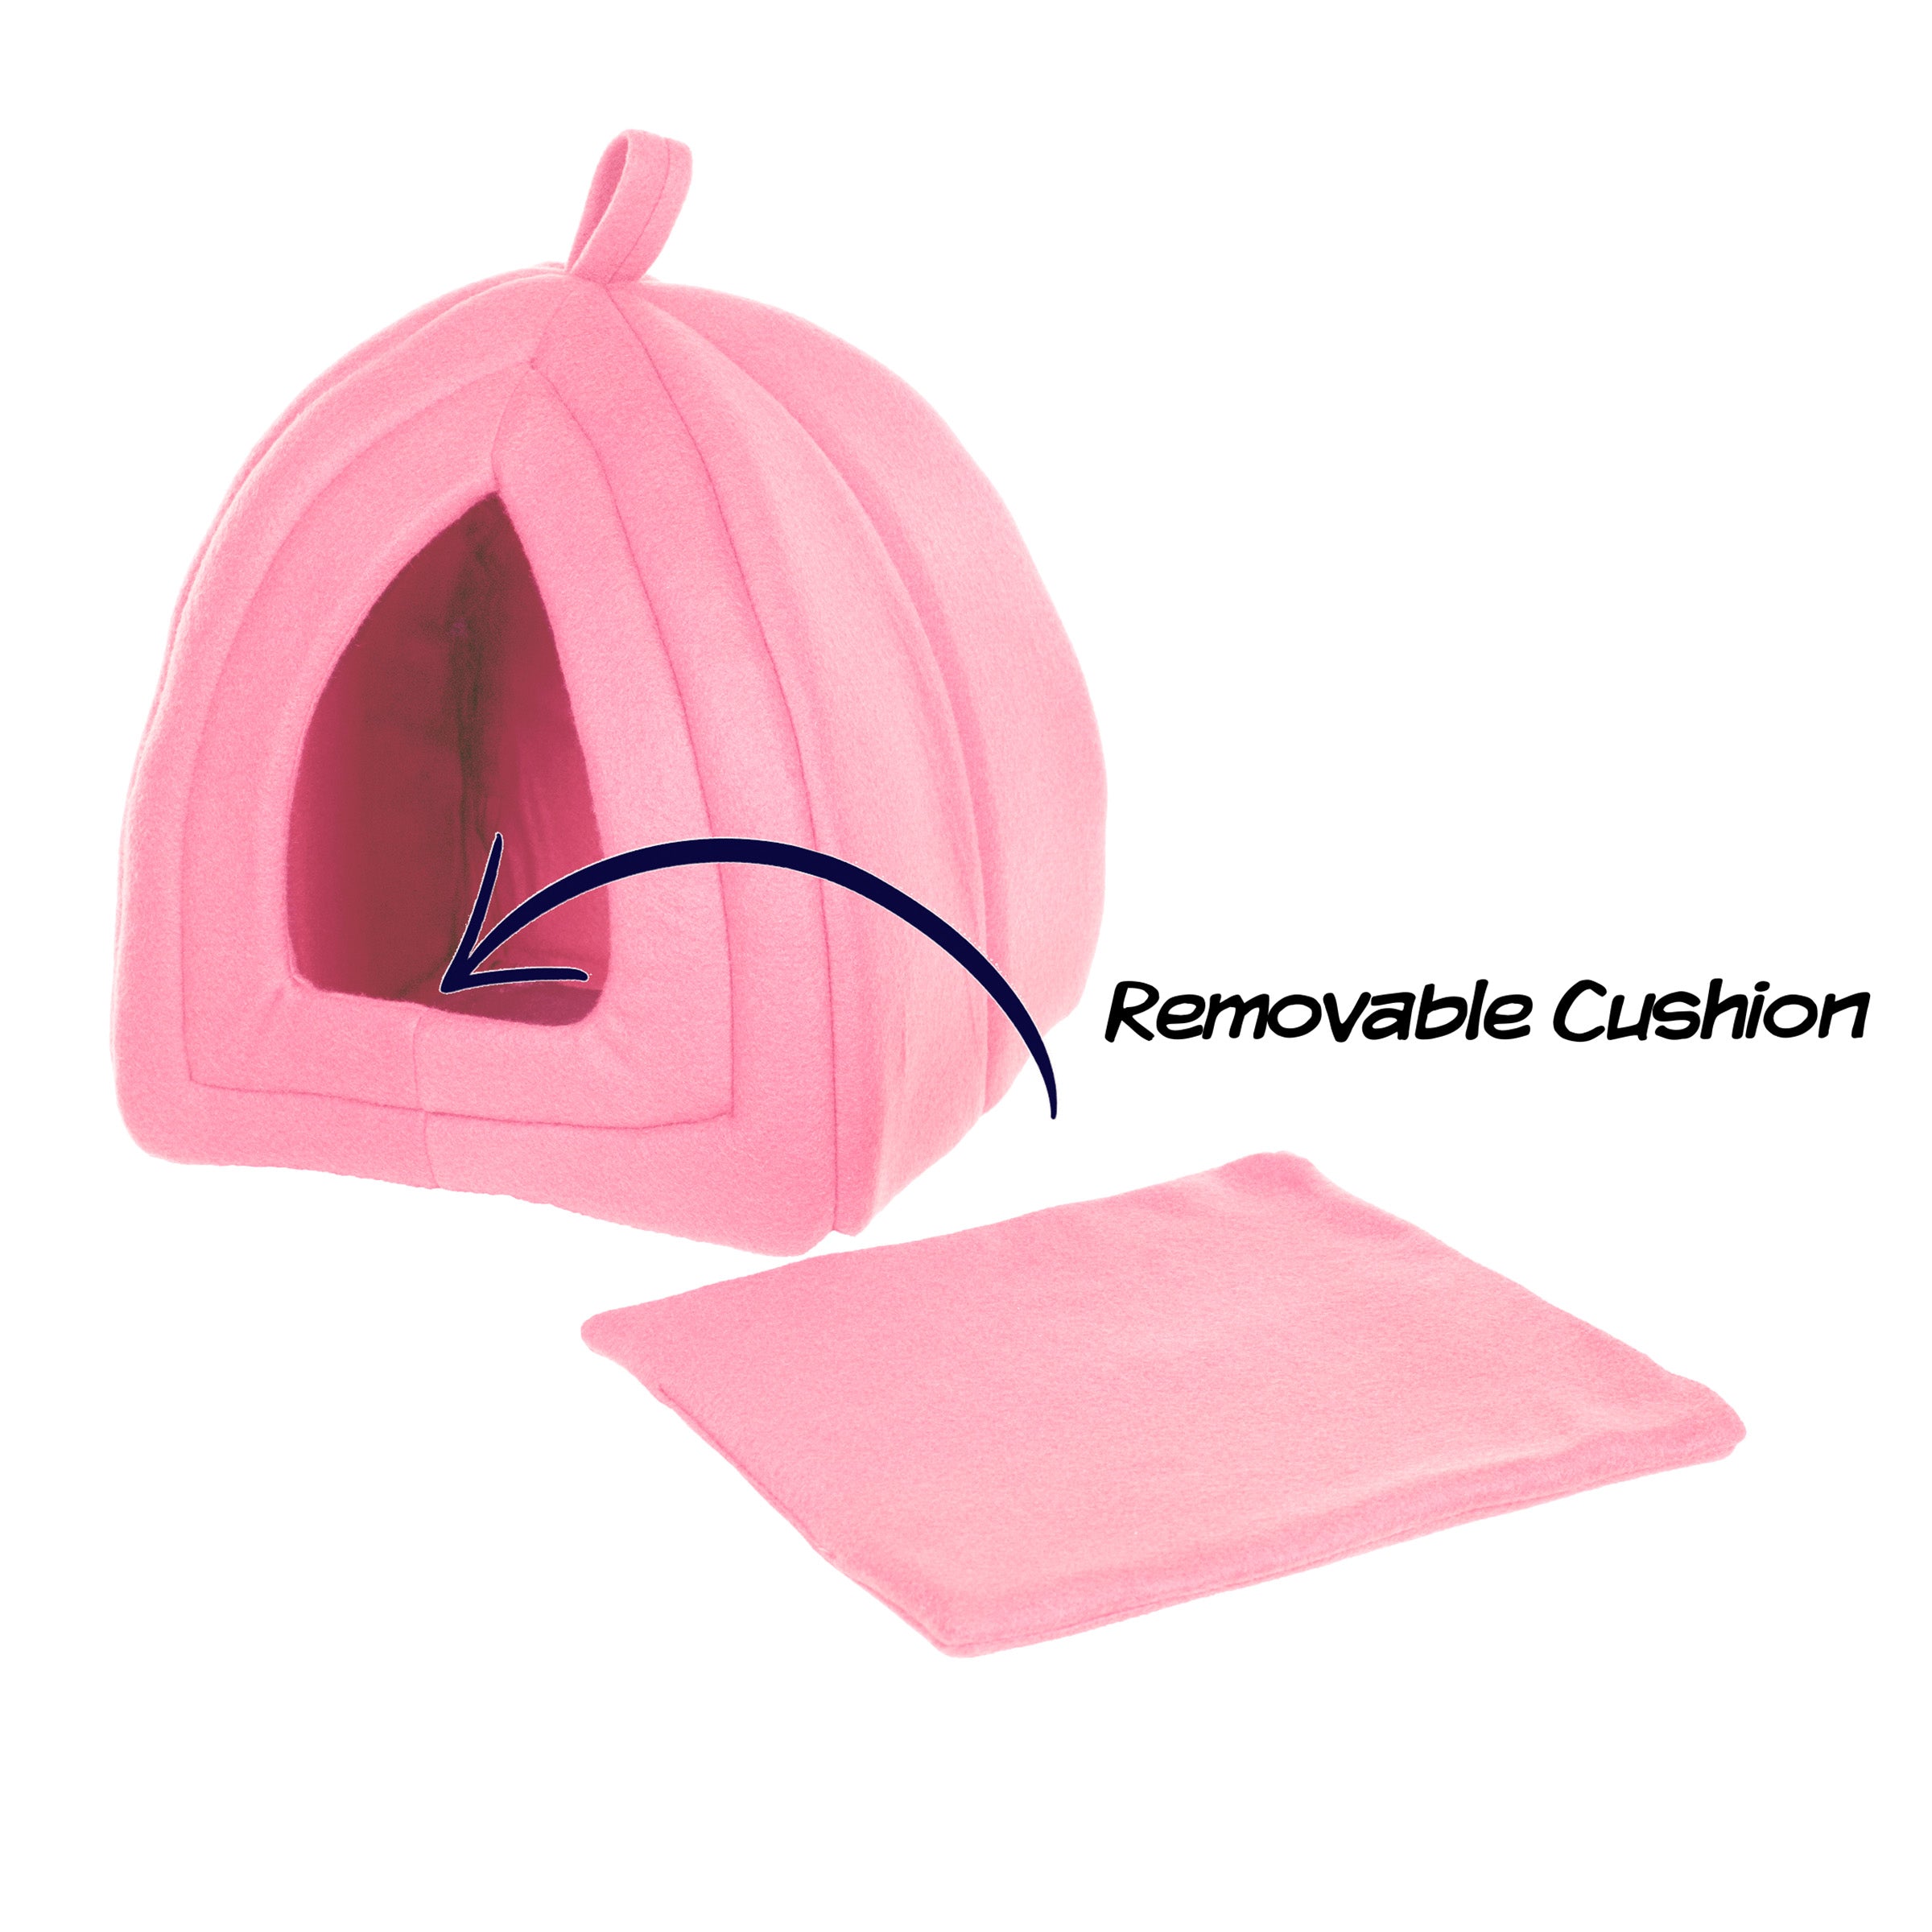 Cat House - Indoor Bed with Removable Foam Cushion - Pet Tent for Puppies， Rabbits， Guinea Pigs， Hedgehogs， and Other Small Animals by PETMAKER (Pink)